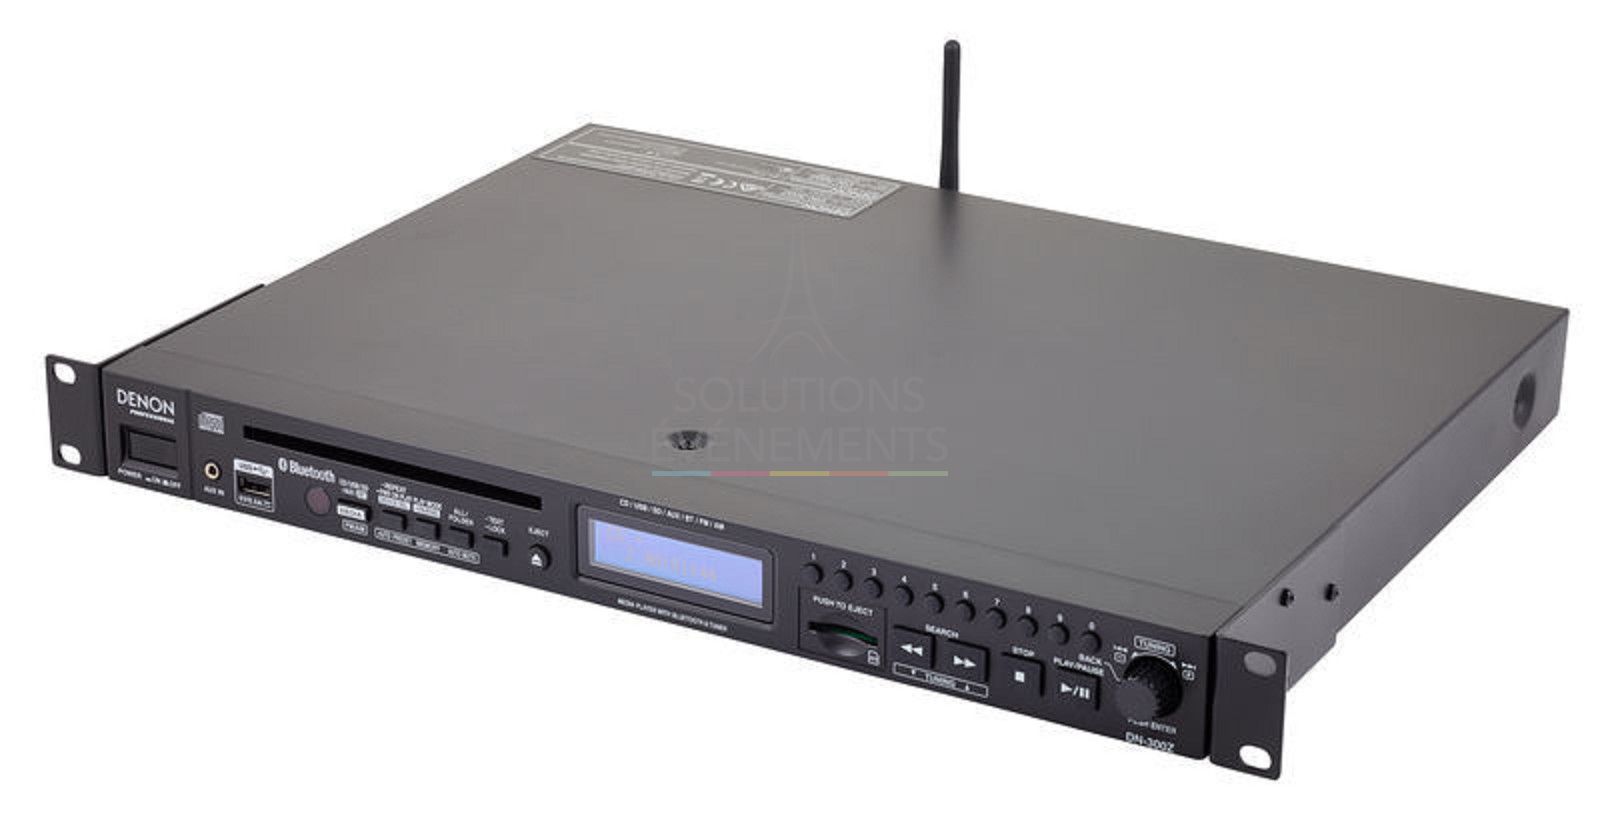 Rental of CD, USB, SD card, Bluetooth and Tuner audio players.